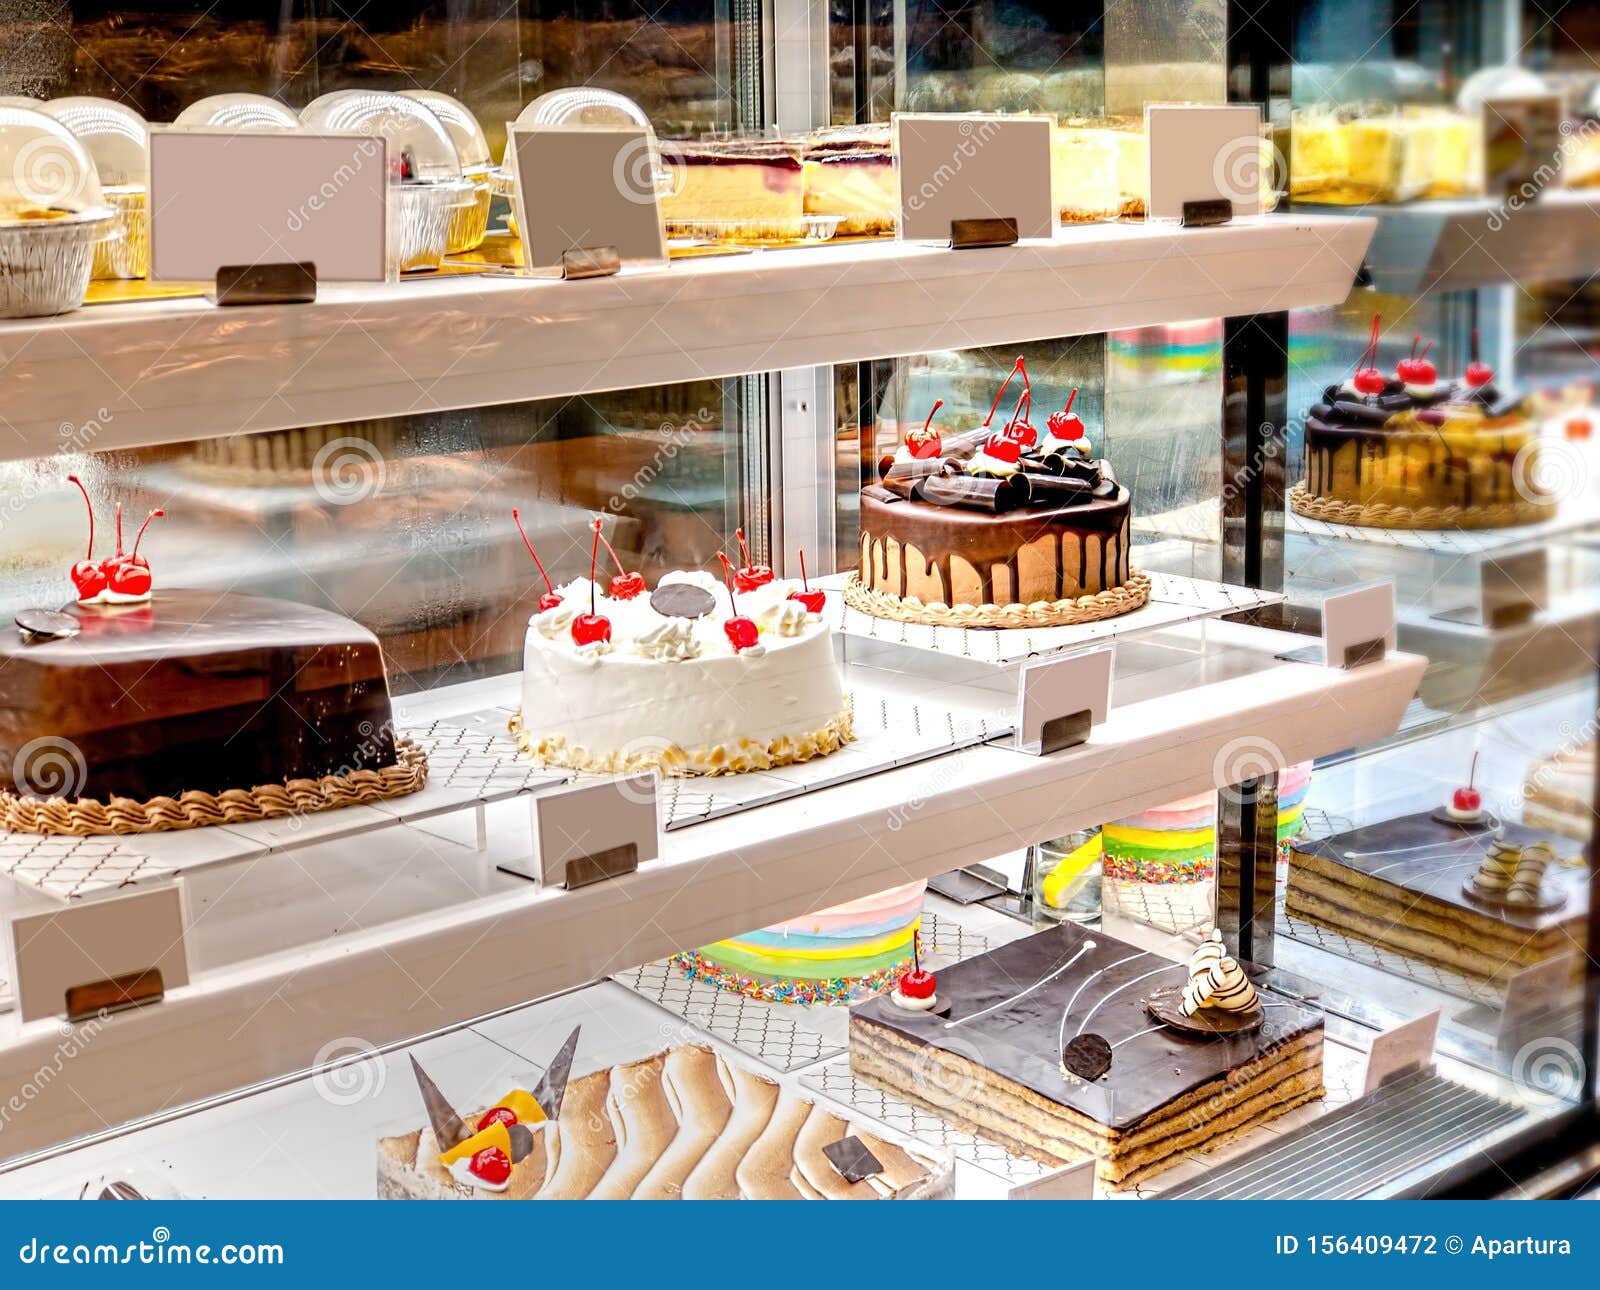 Various Cake With Icing In Refrigerated Bakery Case Cabinet